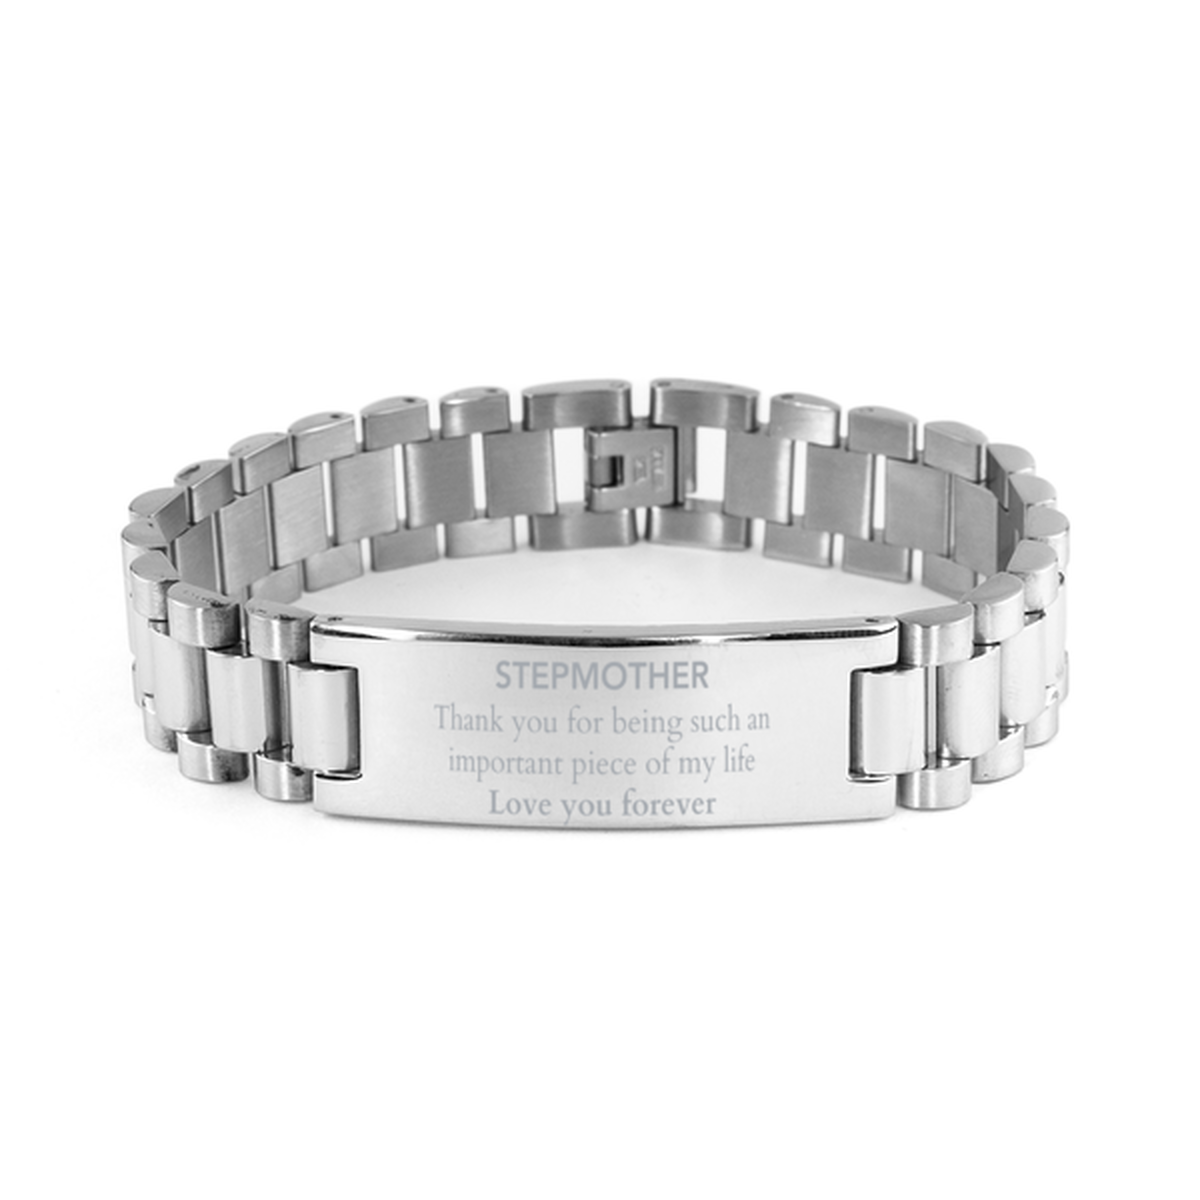 Appropriate Stepmother Ladder Stainless Steel Bracelet Epic Birthday Gifts for Stepmother Thank you for being such an important piece of my life Stepmother Christmas Mothers Fathers Day